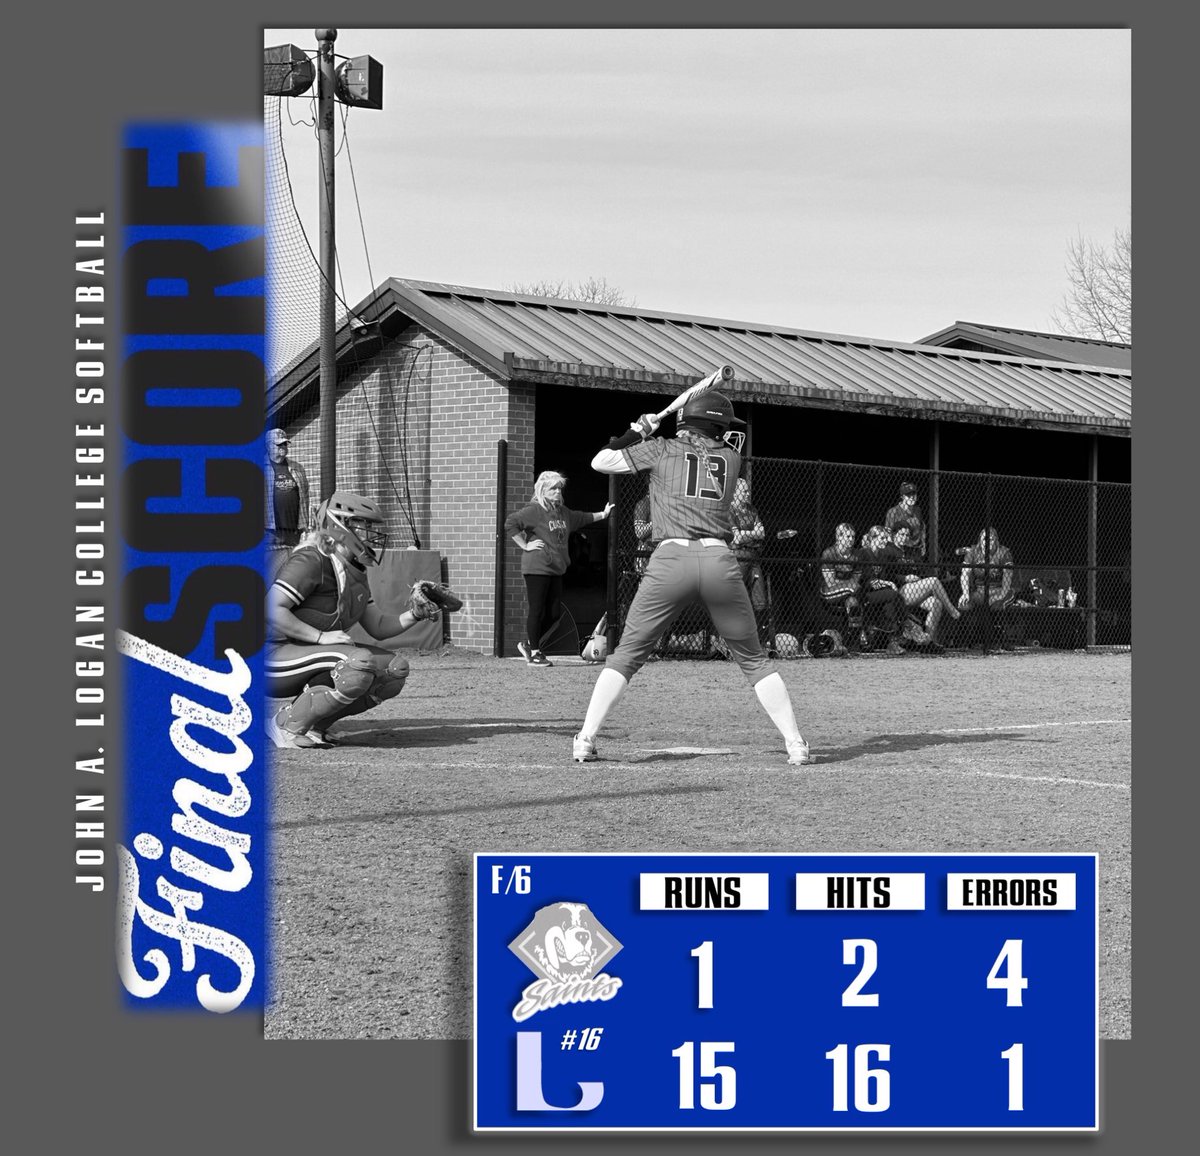 VOLS get a SWEEP on the day over Shawnee Community College‼️

Back in action this Tuesday (4/16) at HOME against Lincoln Trail🔵⚪️ #GOVOLS